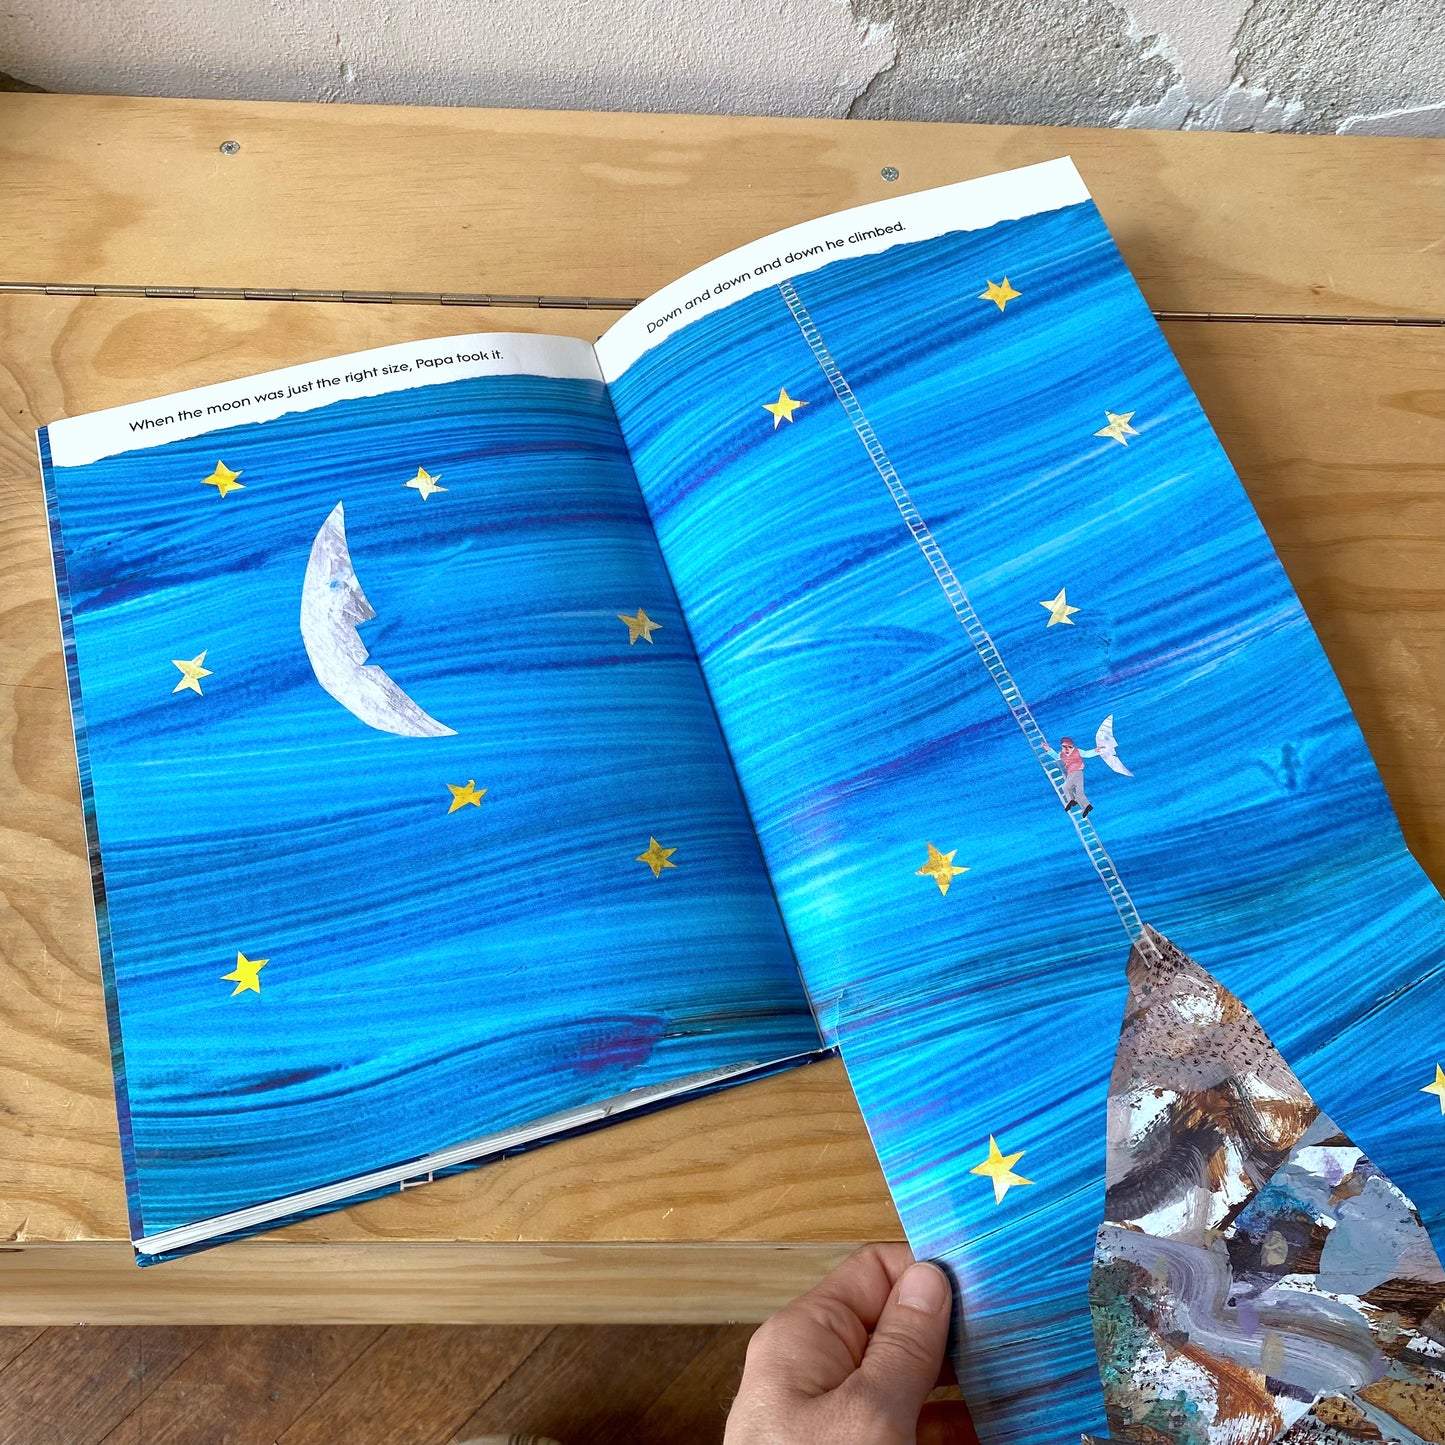 Papa, please get the moon for me (1996) / Eric Carle